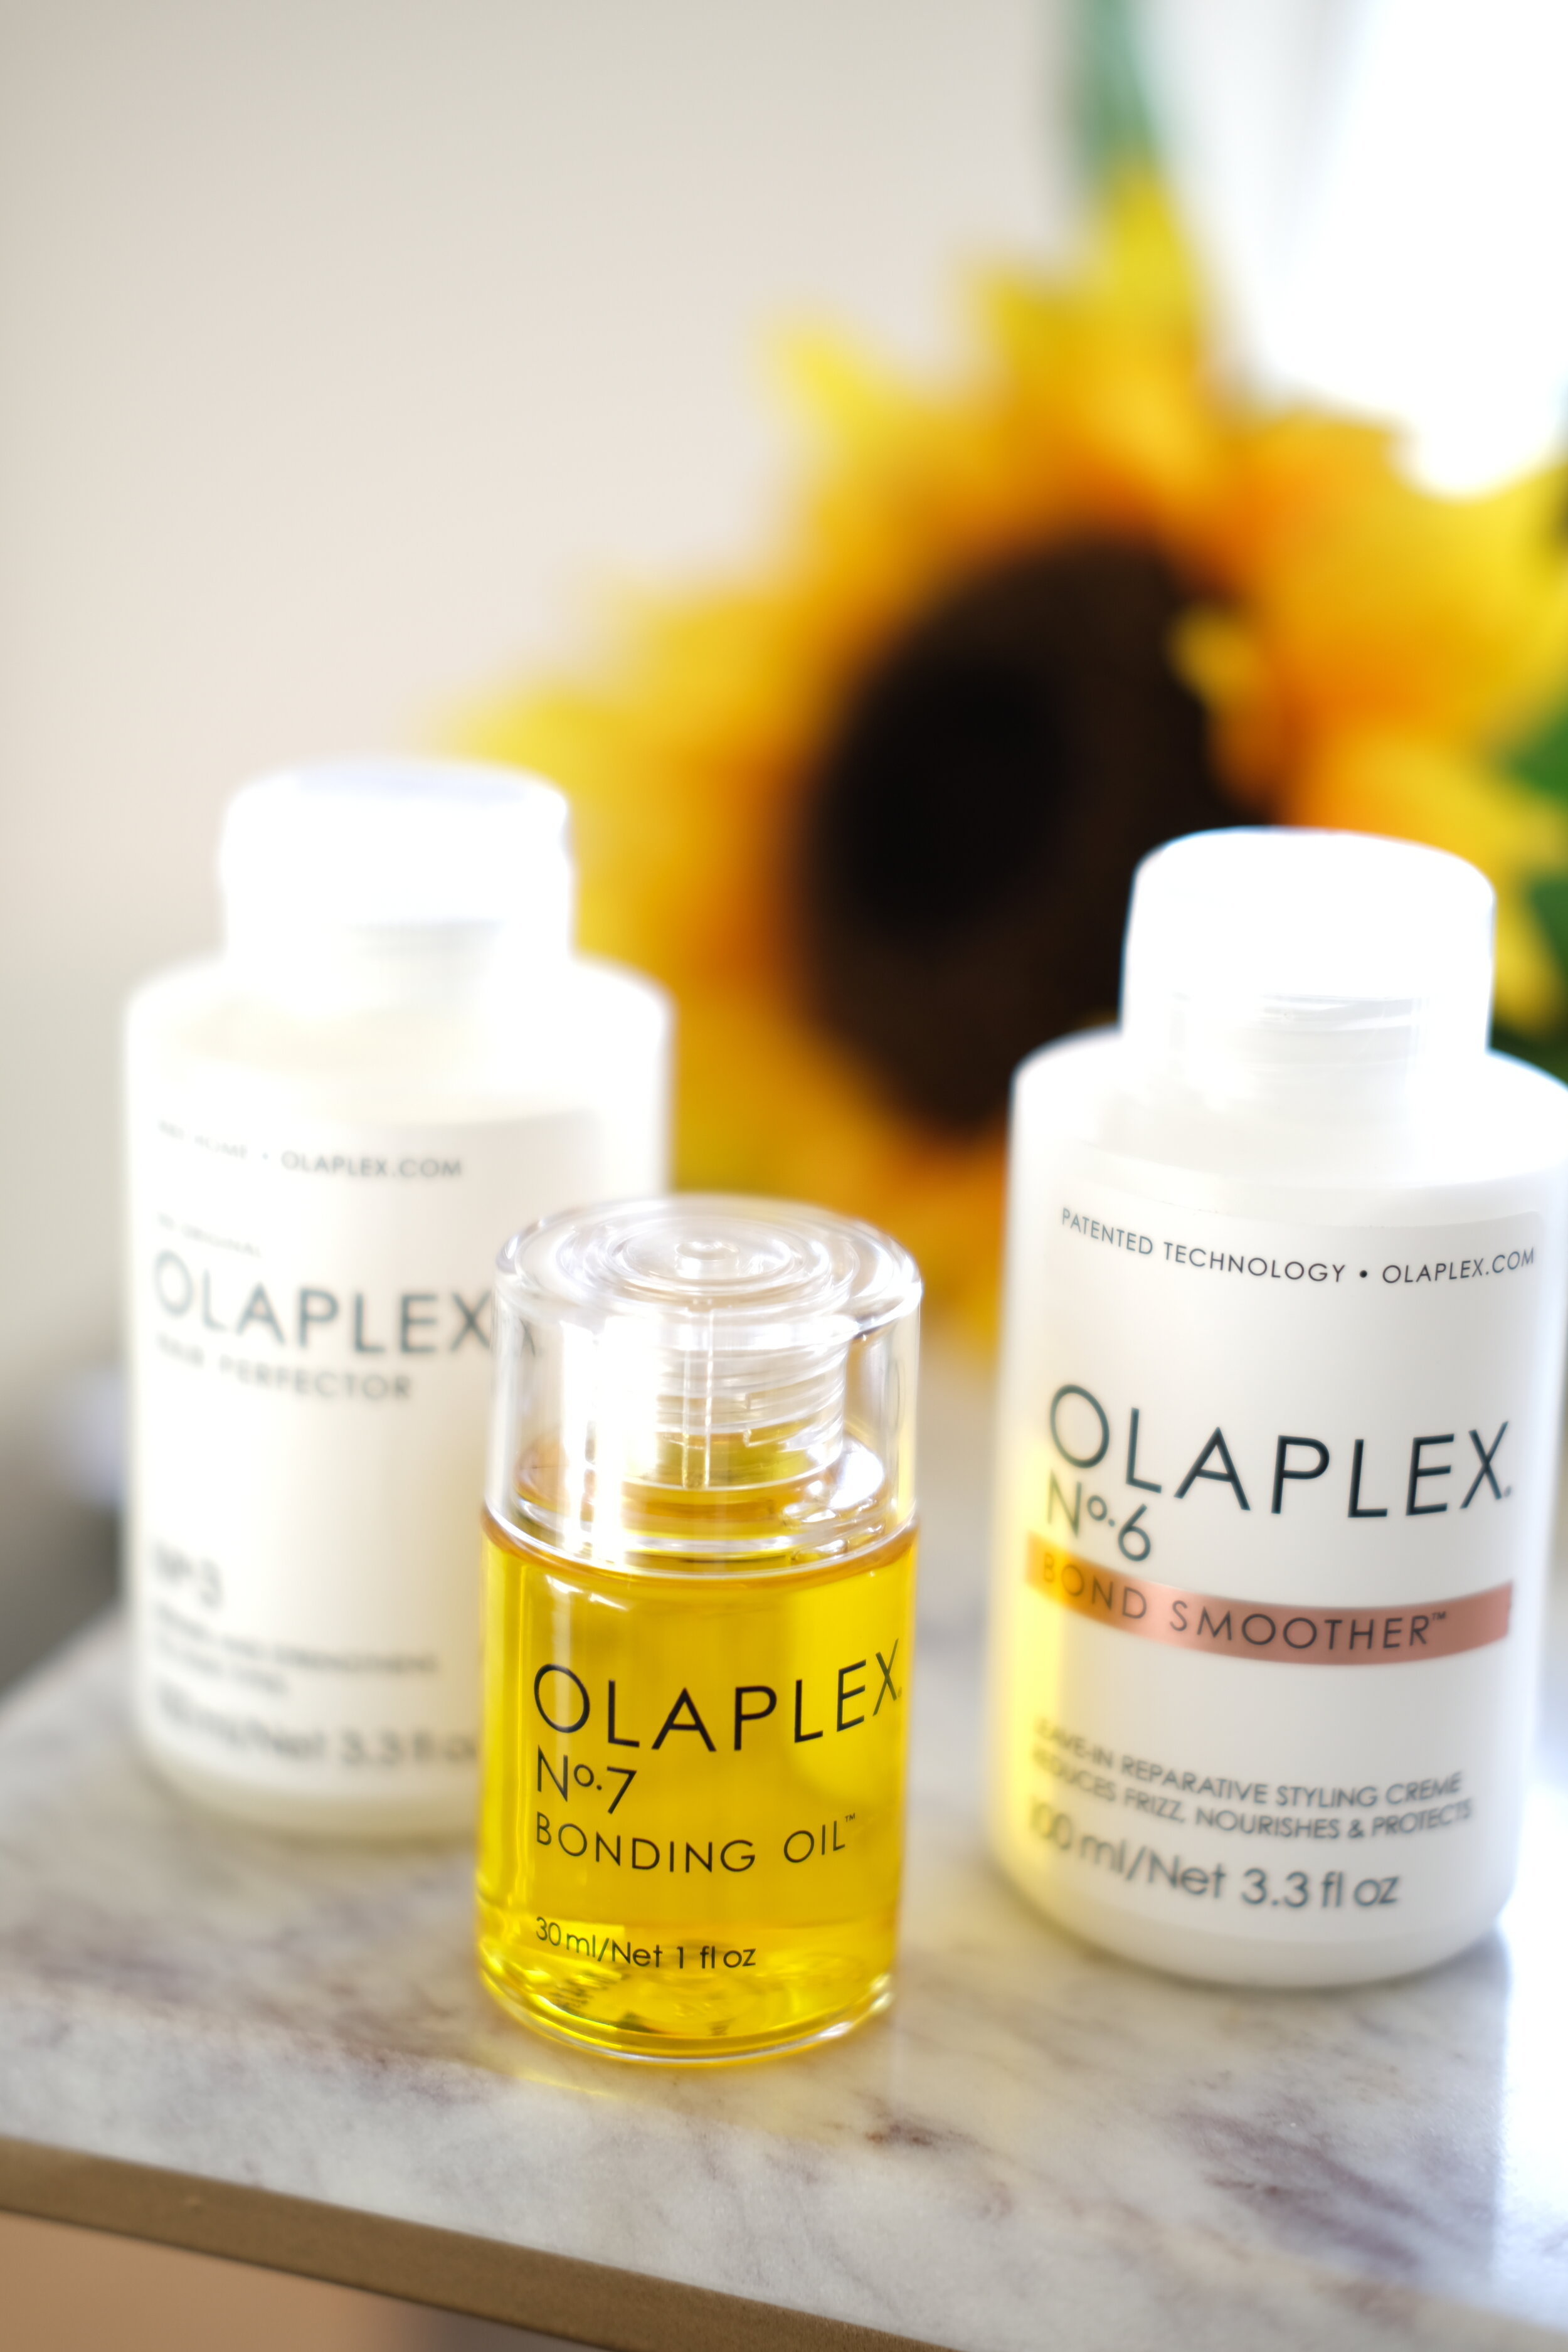 Olaplex Before and After Hair Review - Olaplex No. 3 Hair Perfector, Olaplex No. 6 Bond Smoother and Olaplex No. 7 Bonding Oil. In this Olaplex review, I’m reviewing 3 Olaplex products; Olaplex No. 3 Hair Perfector, Olaplex No. 6 Bond Smoother and O…